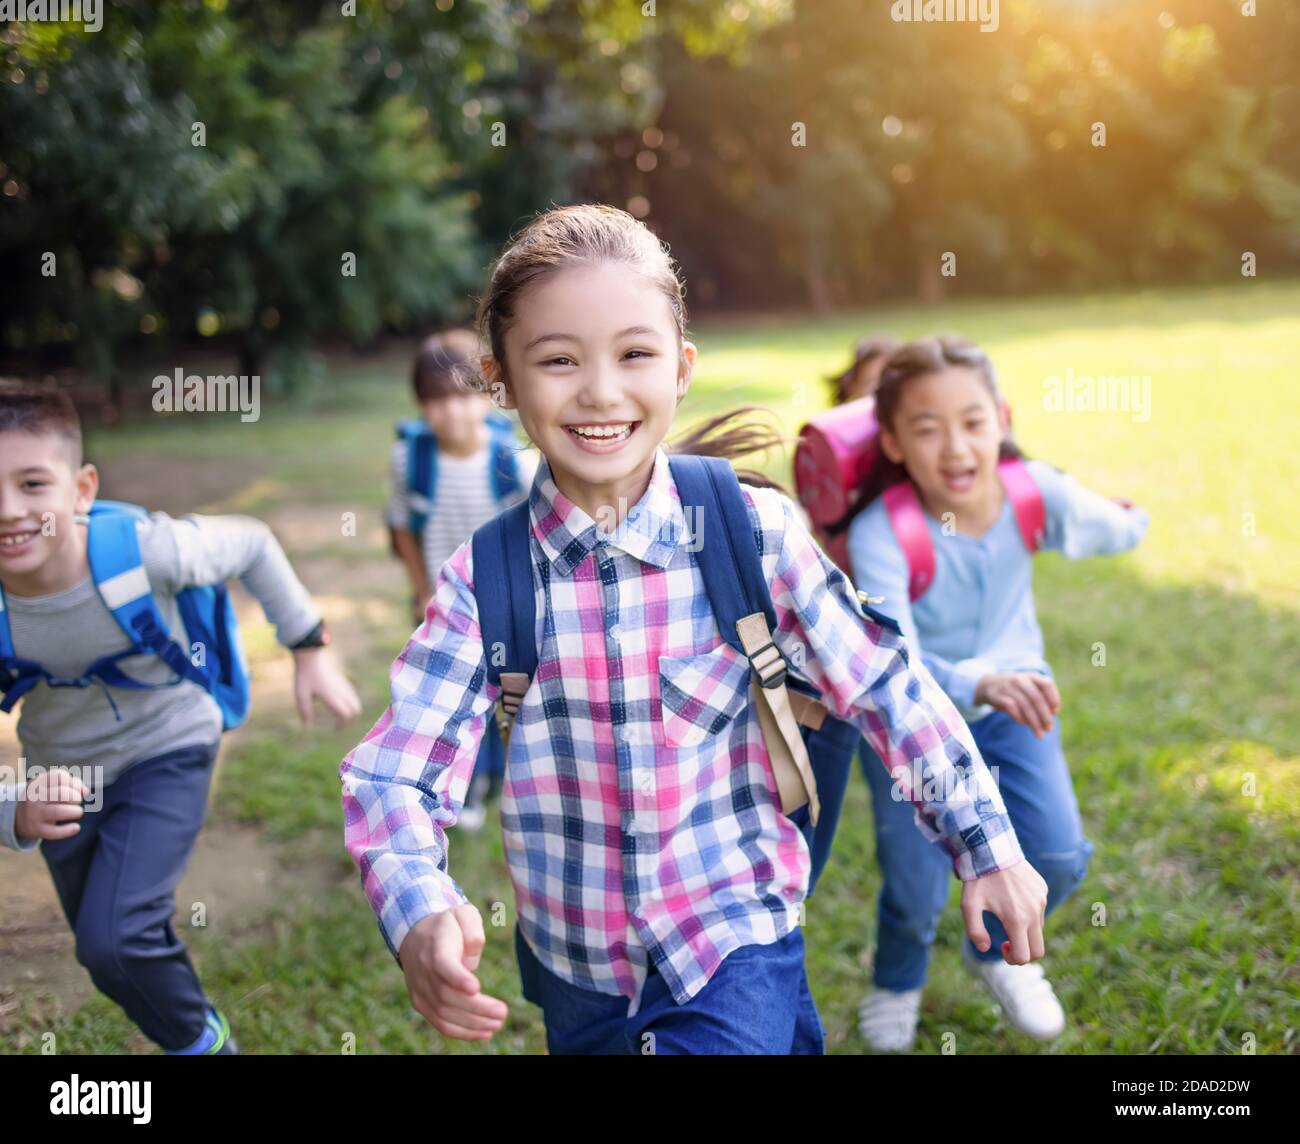 Group of elementary school kids running on the grass Stock Photo